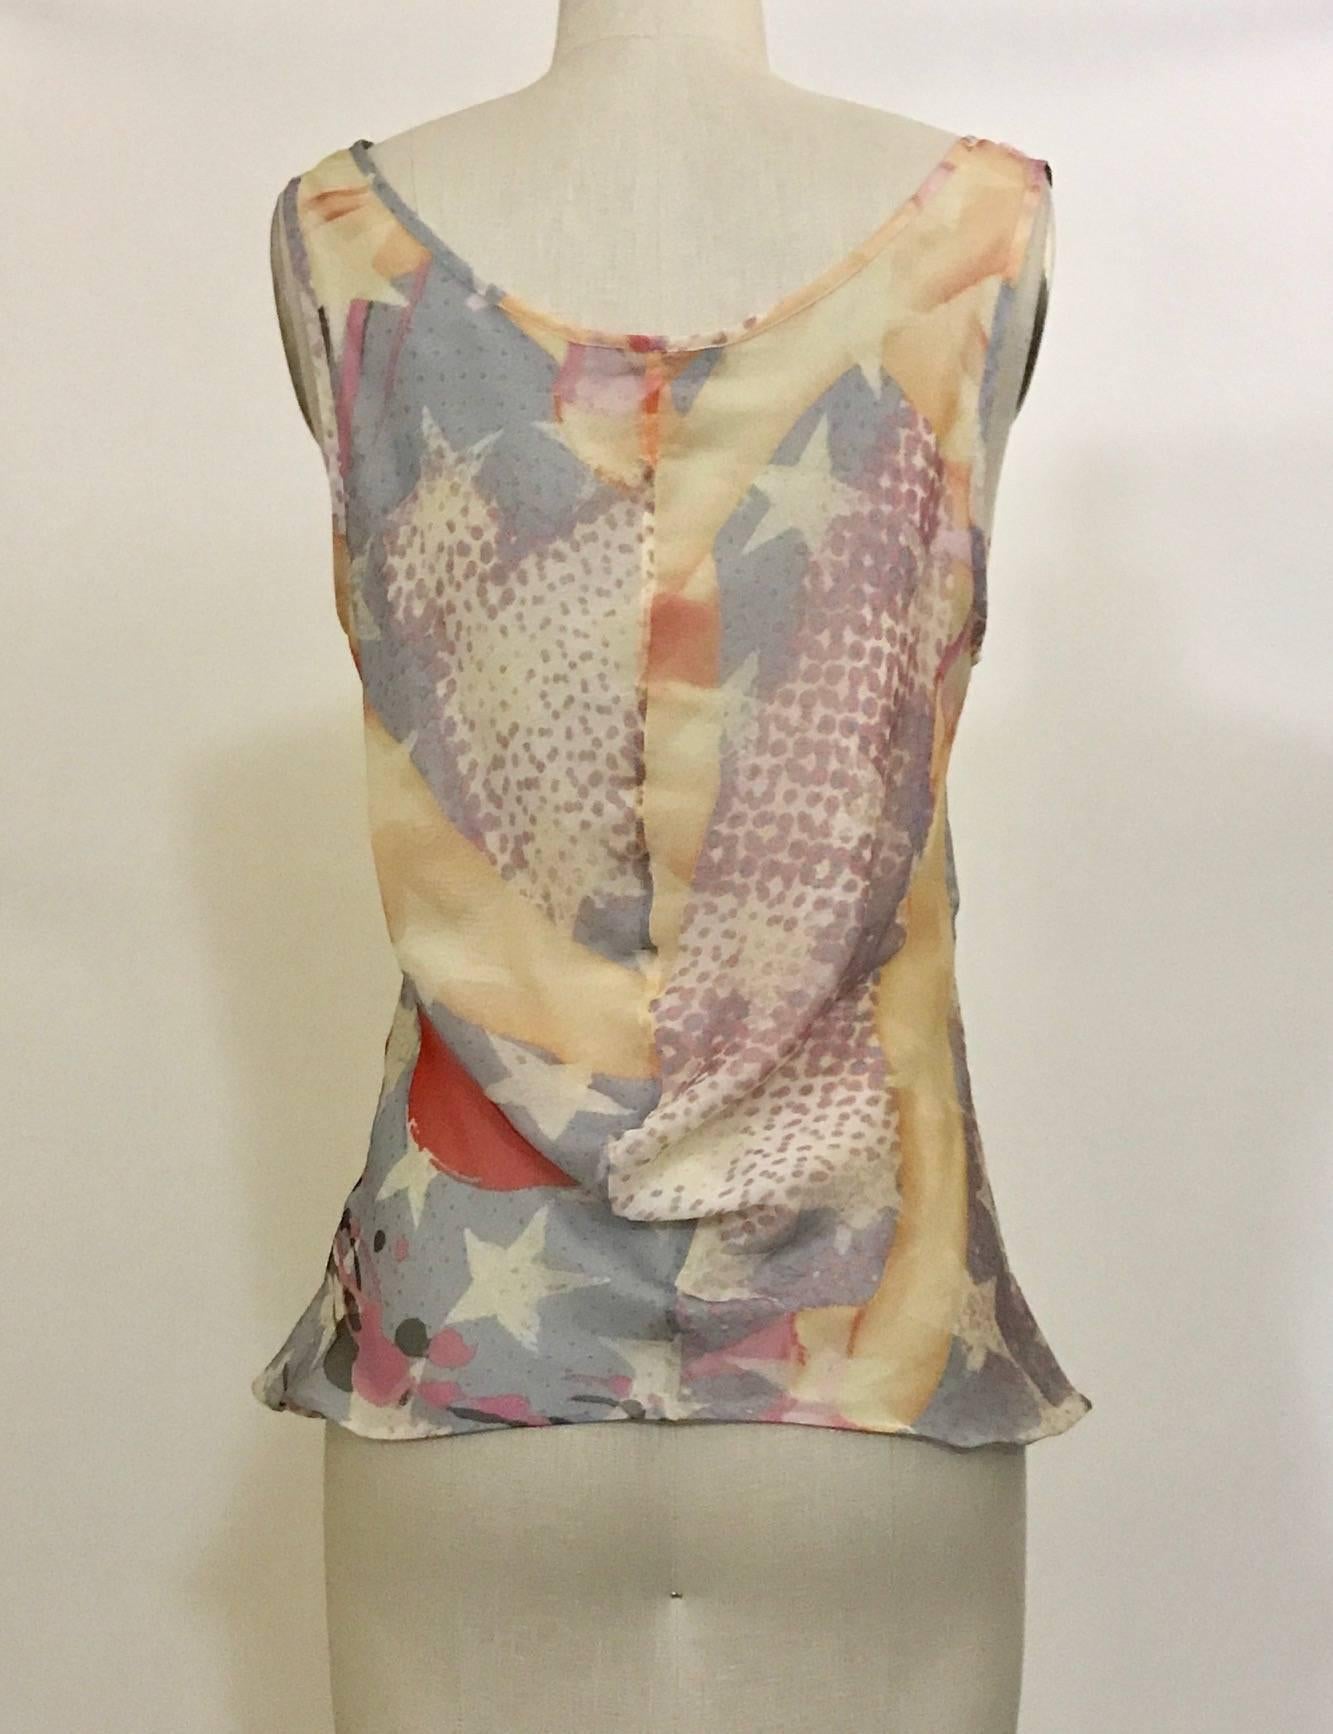 Alexander McQueen 2003 multicolor sleeveless silk chiffon top with abstract print throughout featuring stars and a pin up girl. Solid ivory underlay.

Content label removed, feels like silk chiffon.

Made in Italy.

No size tag, estimated size M.